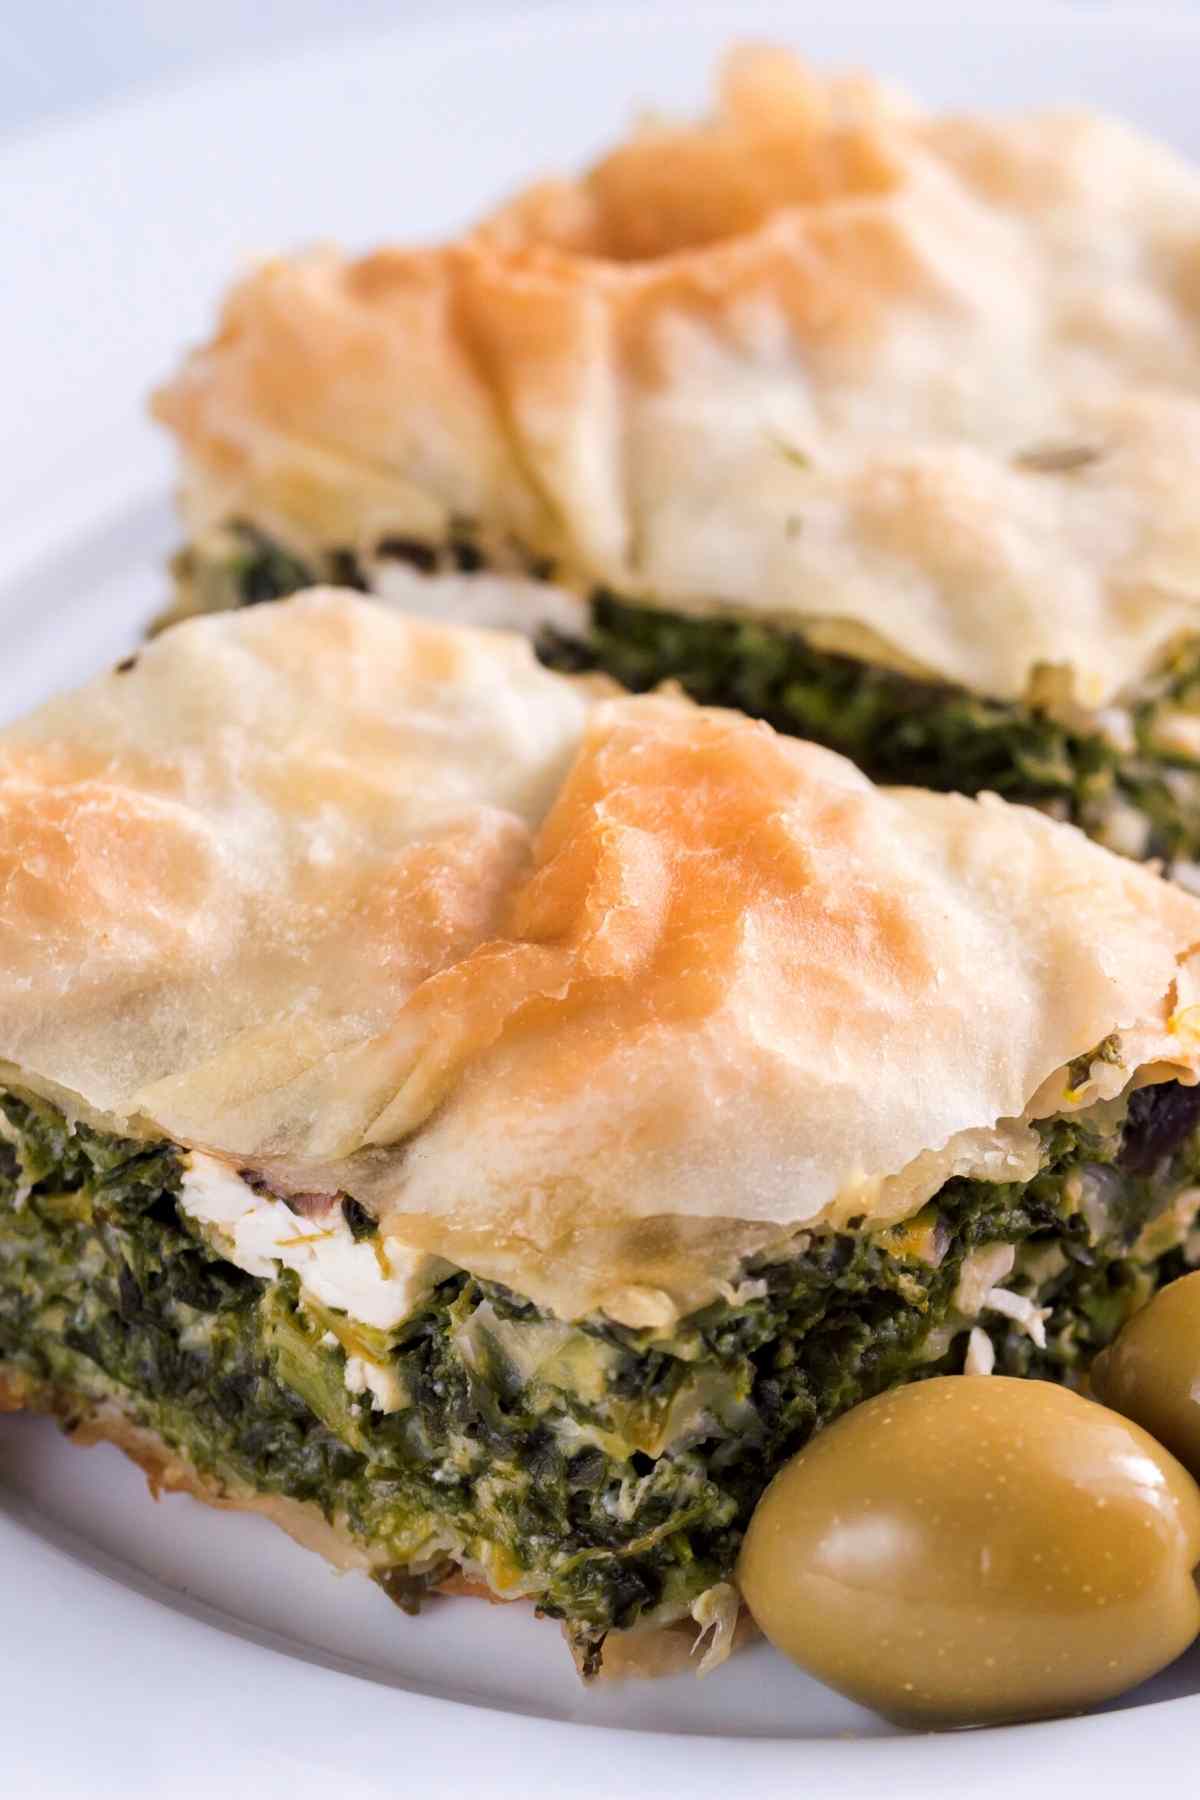 Spinach pie is a Greek delicacy also known as “Spanakopita.” If you haven’t tried this delectable treat yet, now is the time! Made with layer upon layer of crunchy phyllo dough, filled with spinach and feta cheese, and baked to golden perfection, spinach pie is a comforting, filling, and scrumptious food.